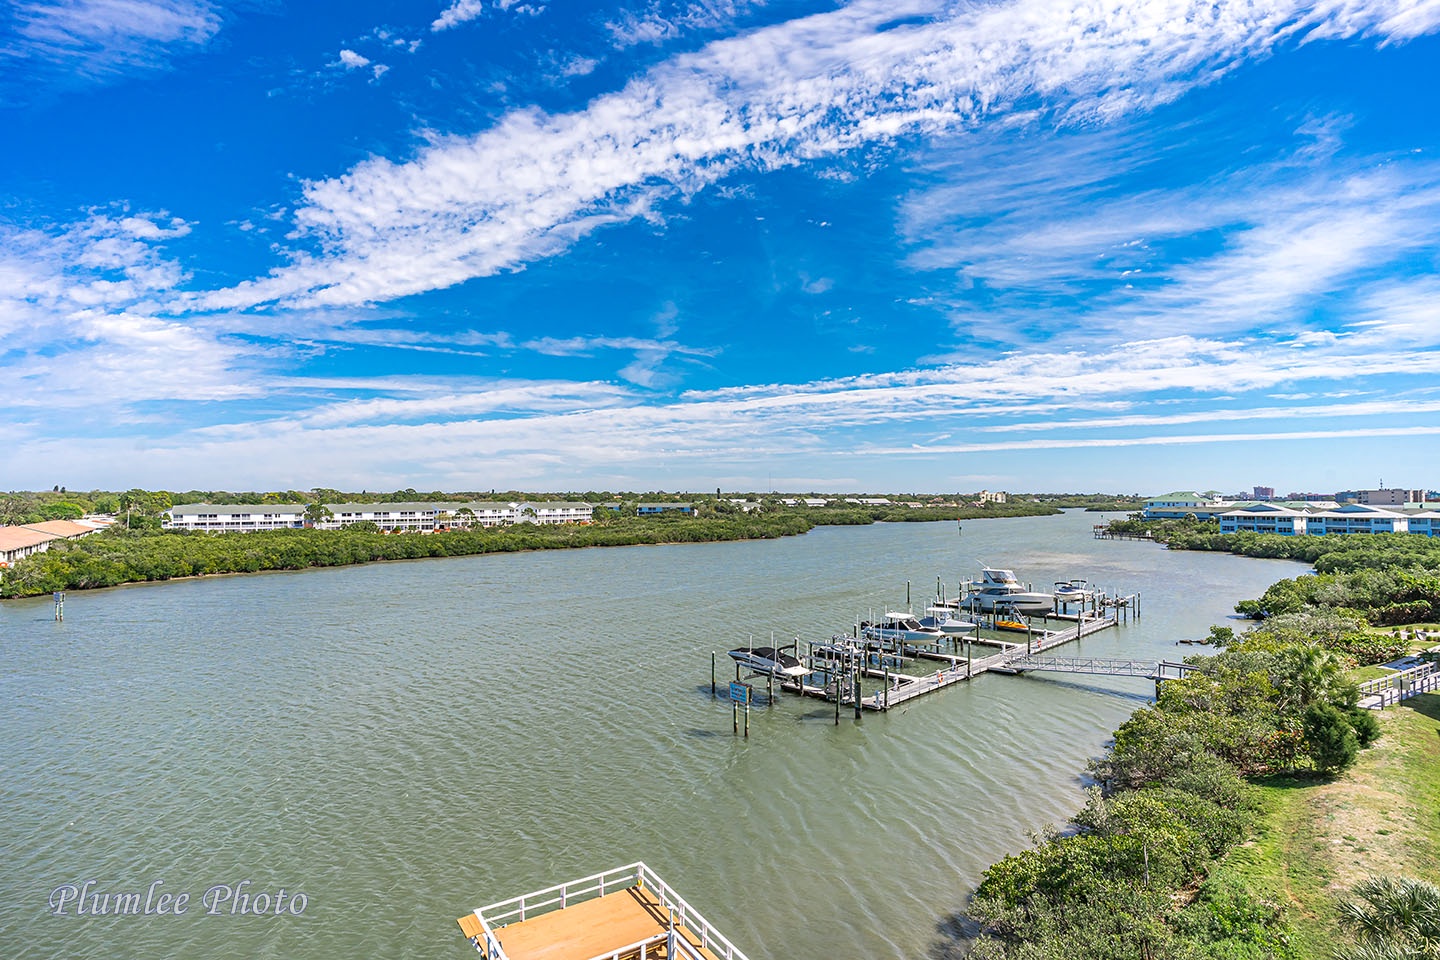 The view looking Southward down Intracoastal Waterway.